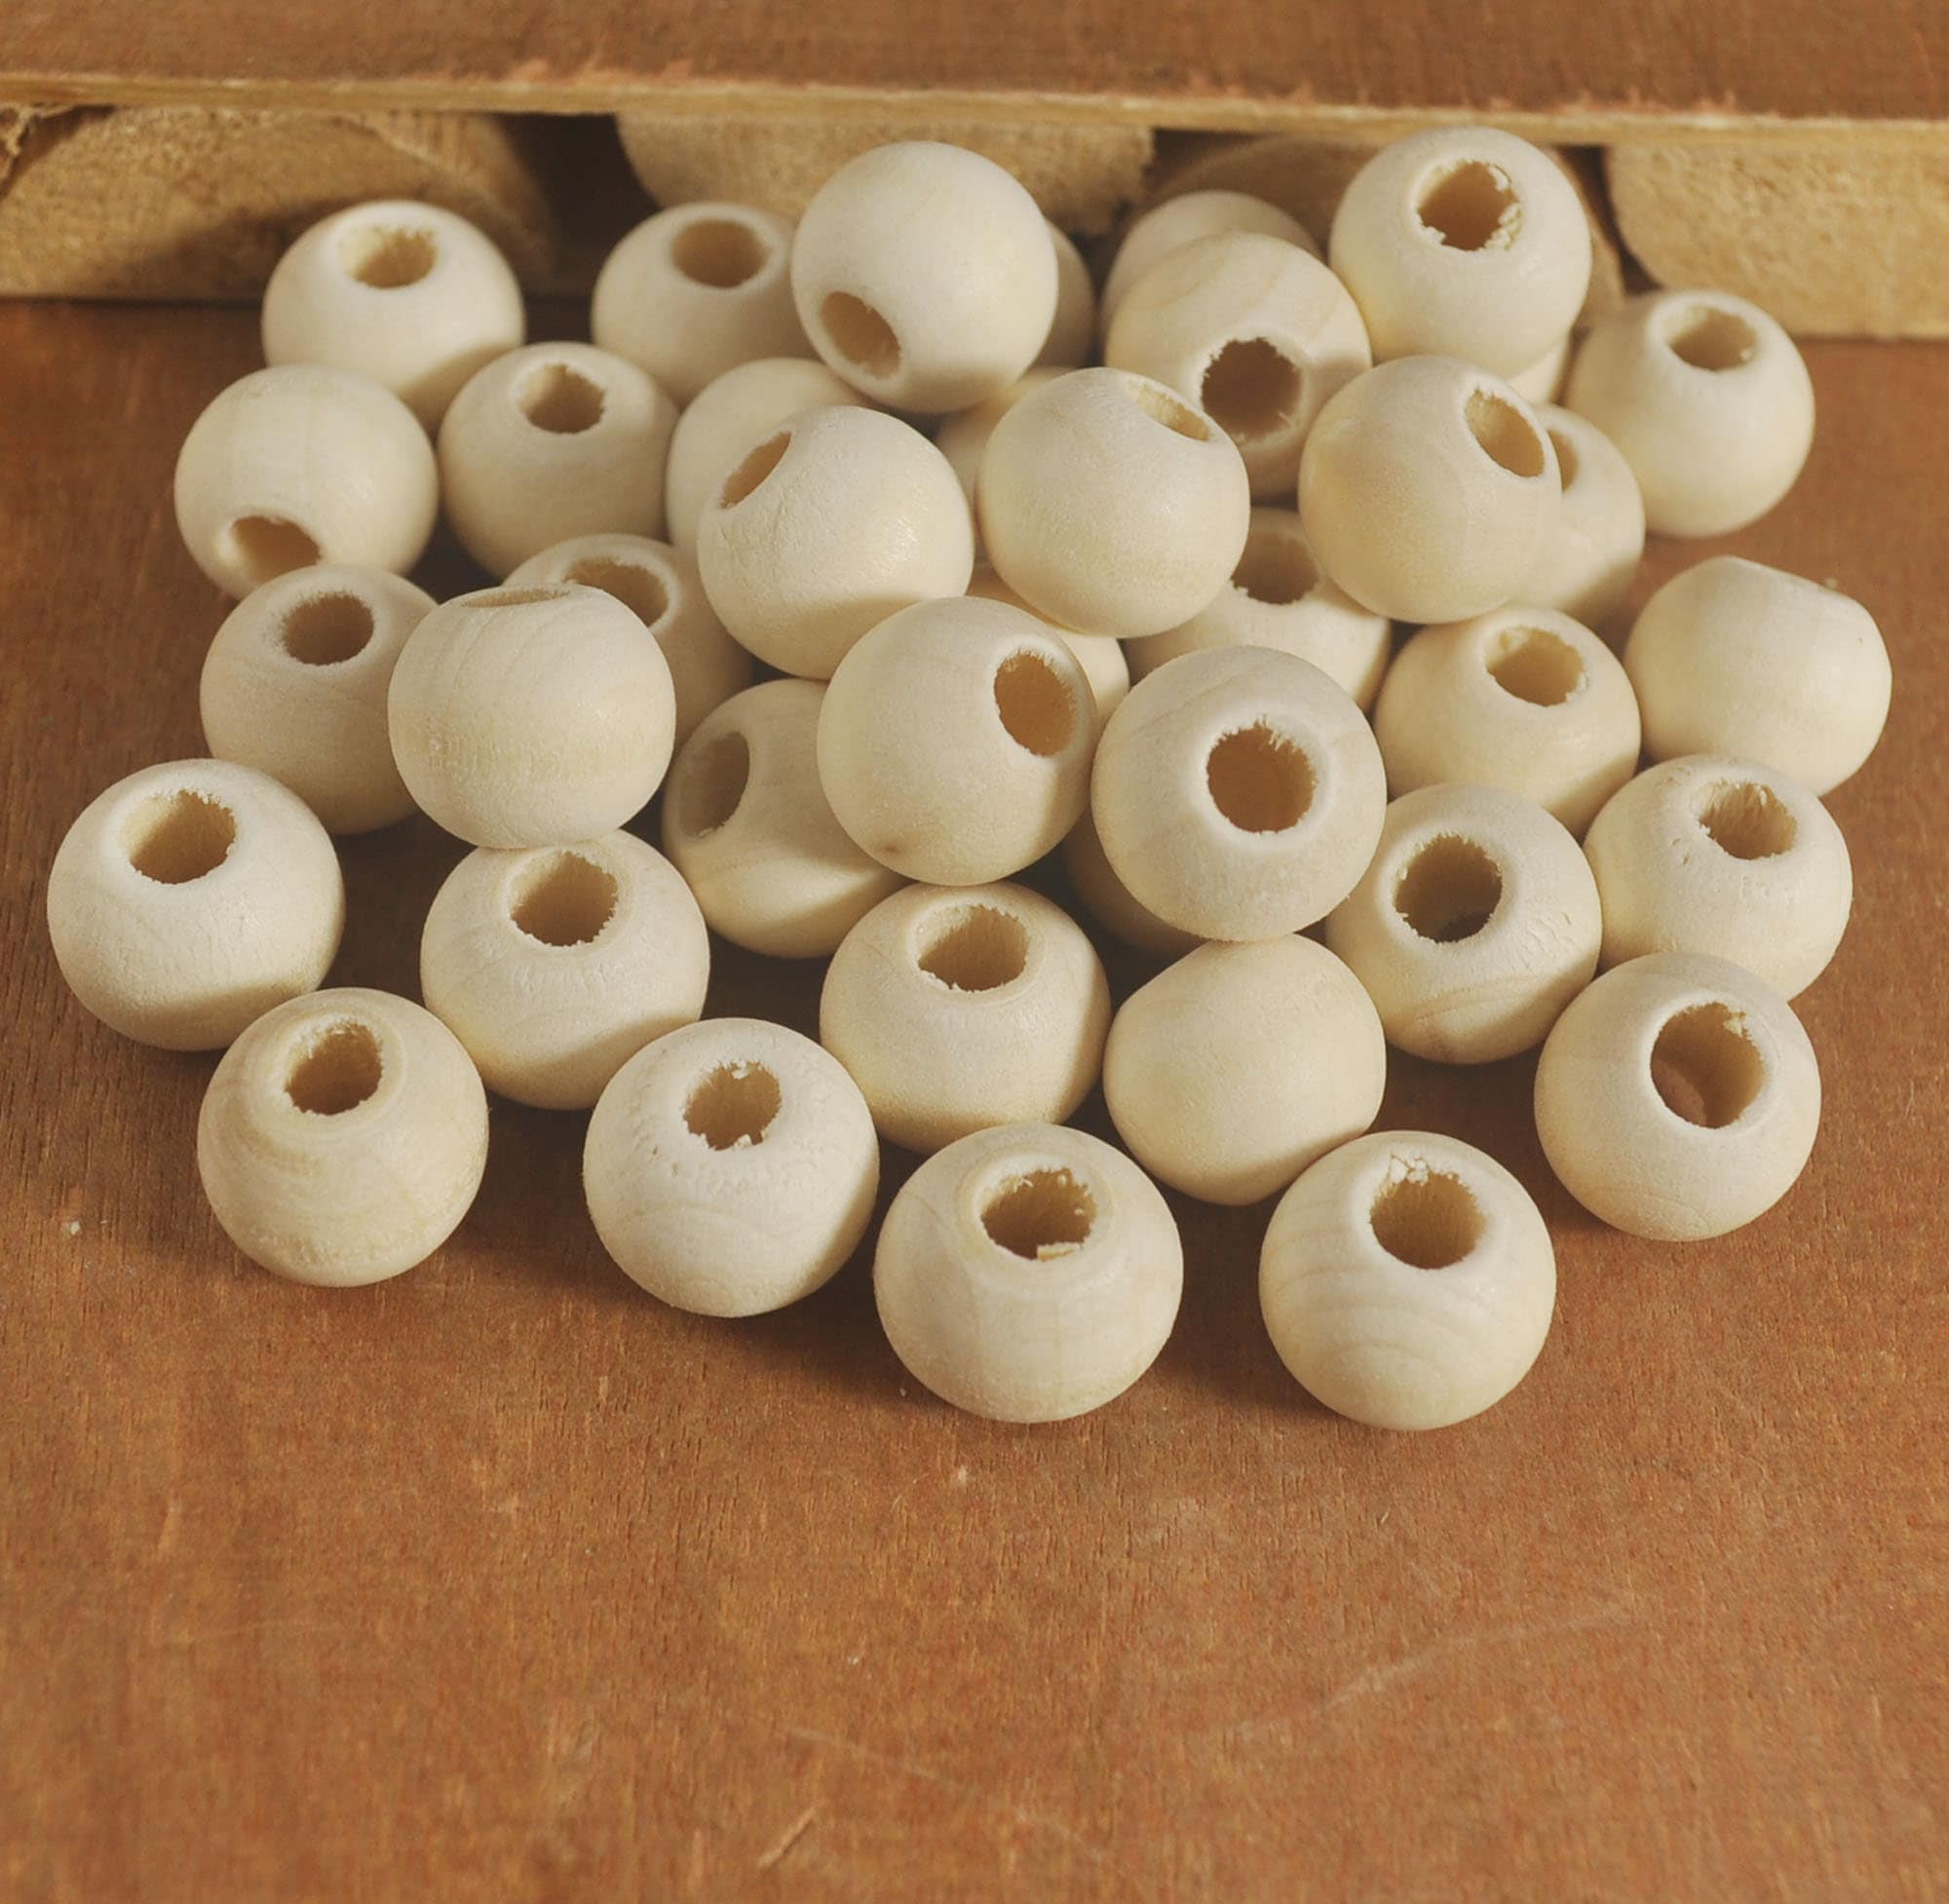 50pcs Handcraft 12mm Round Unfinished Wood Wooden Beads DIY Crafts Supplies